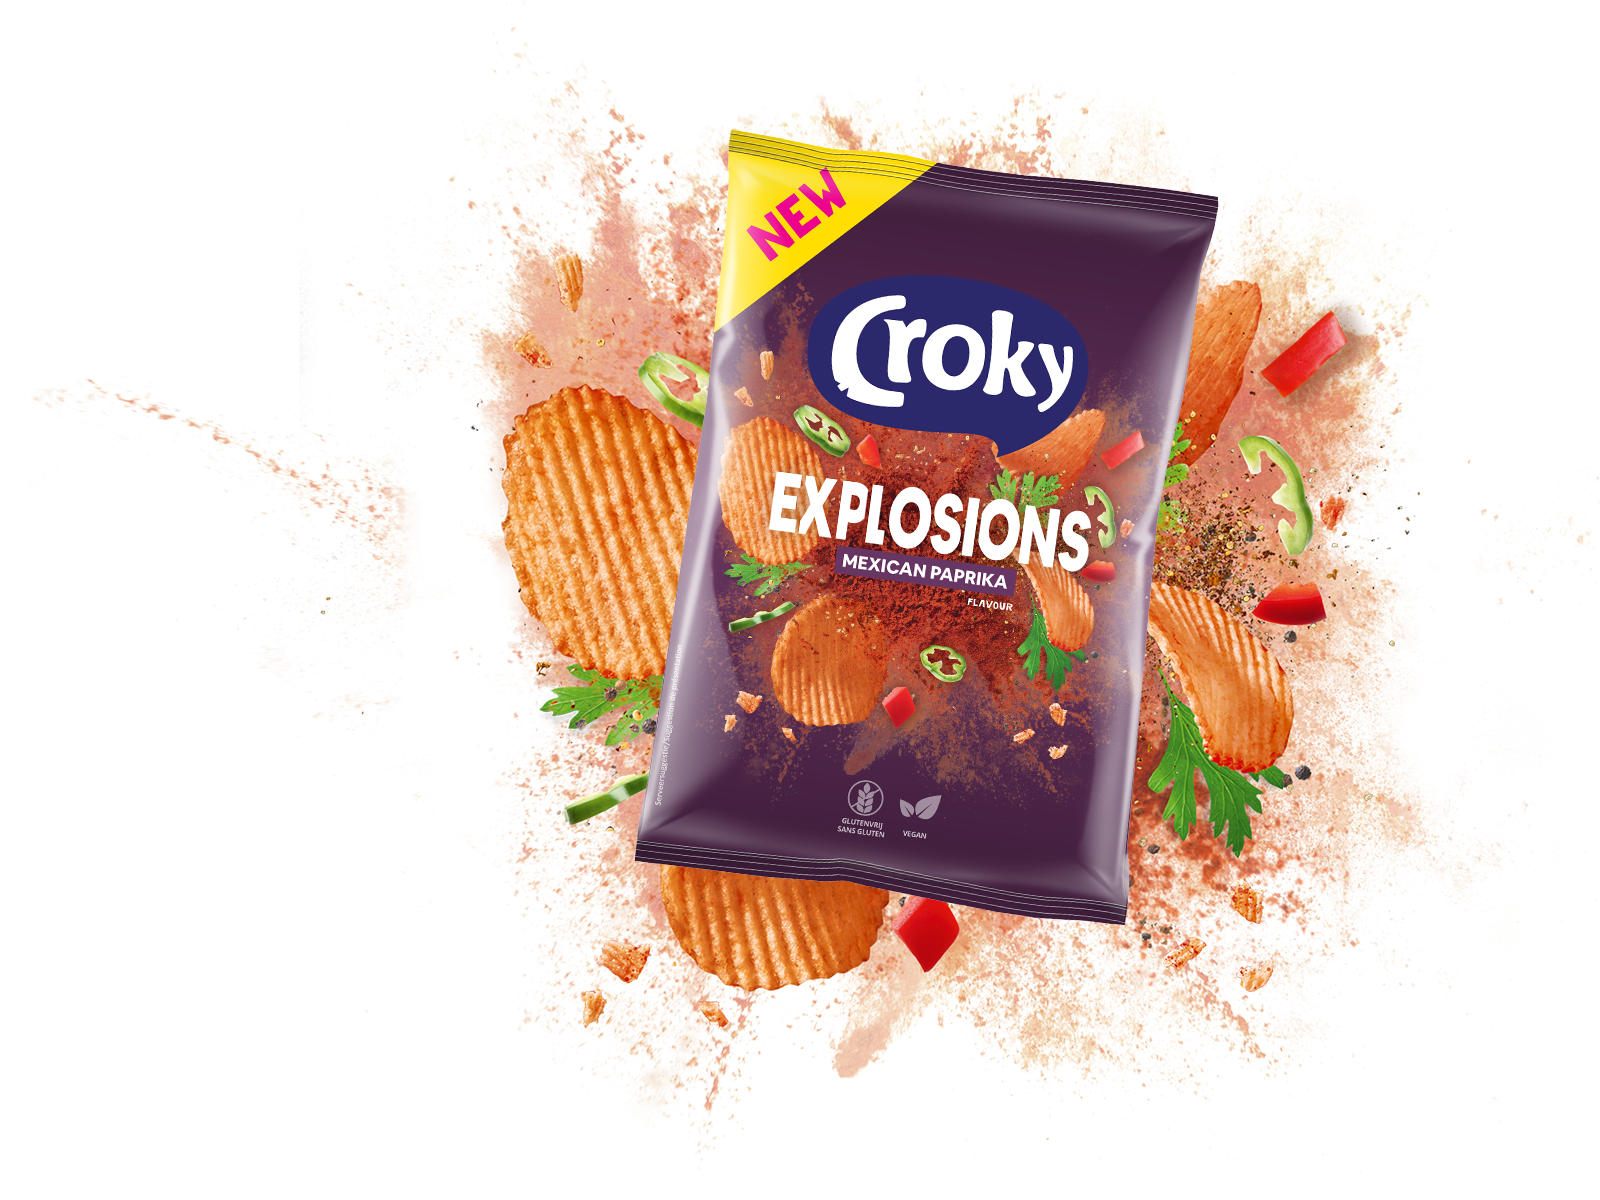 Croky Explosions Mexican Paprika 